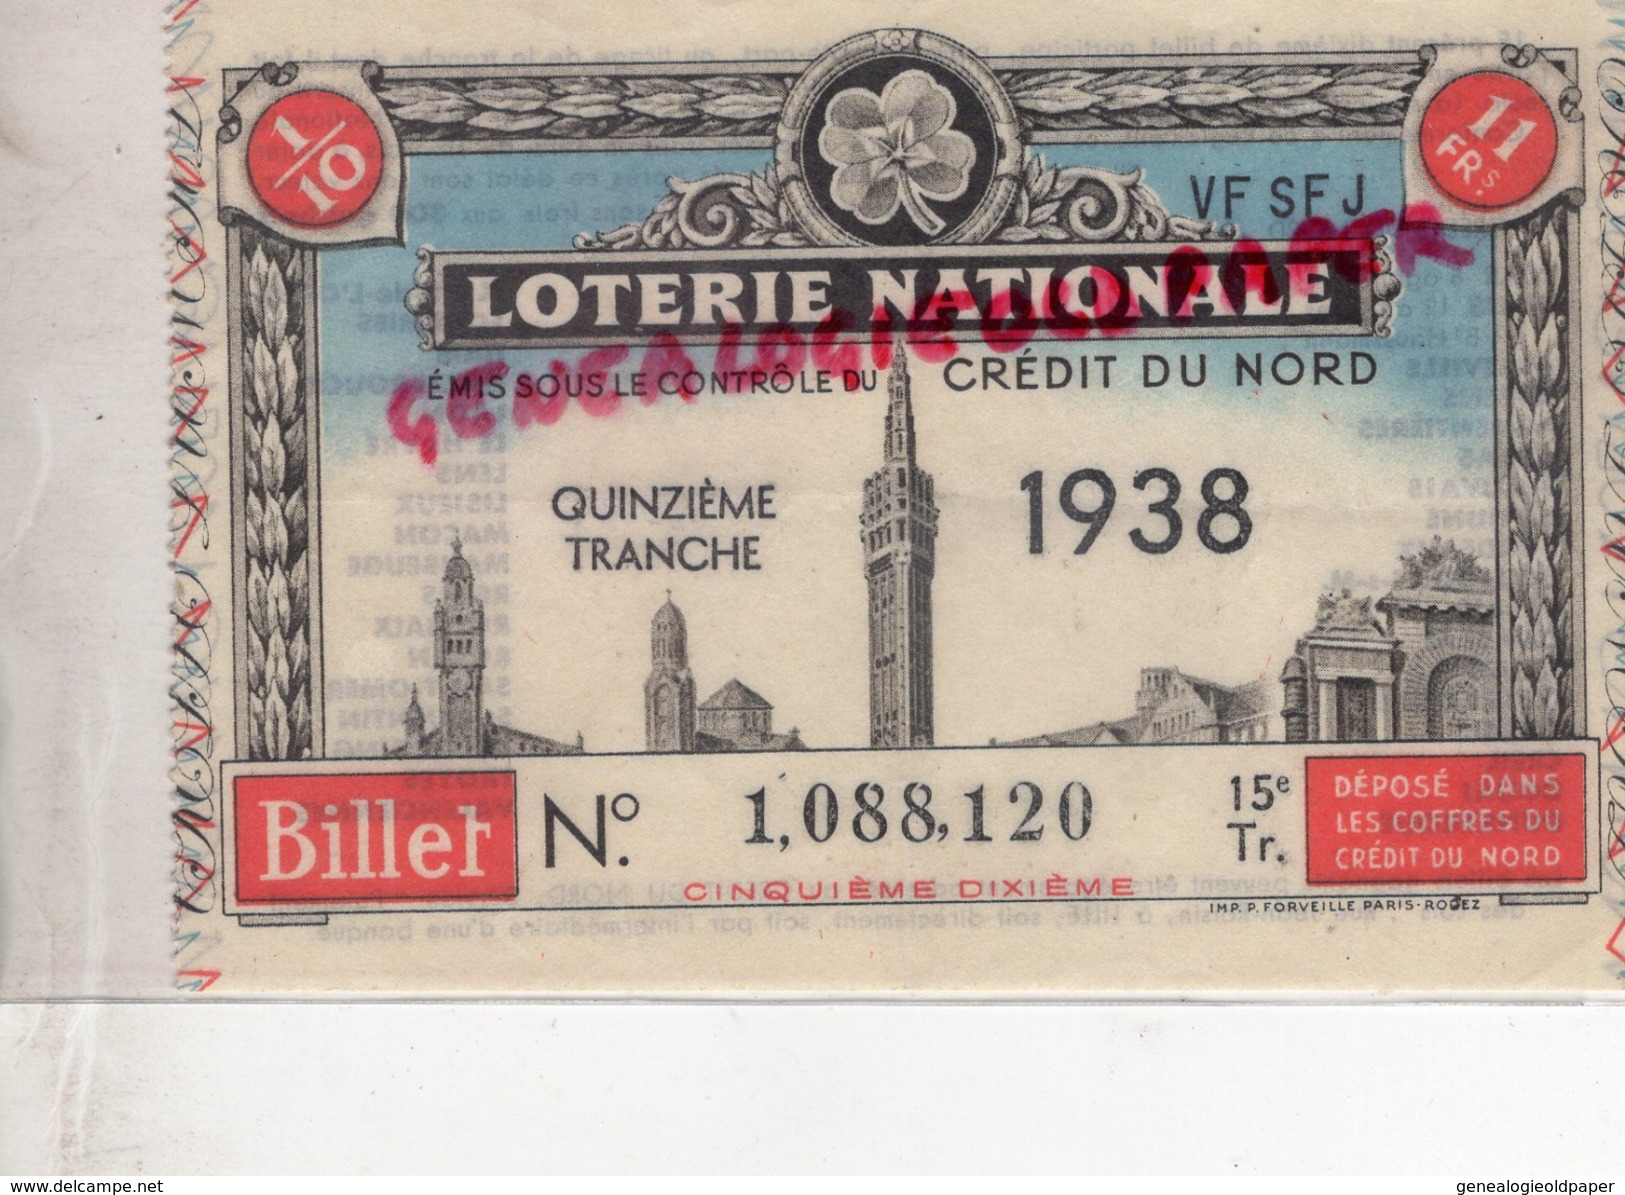 LOTERIE NATIONALE 1938- CREDIT DU NORD - Lotterielose